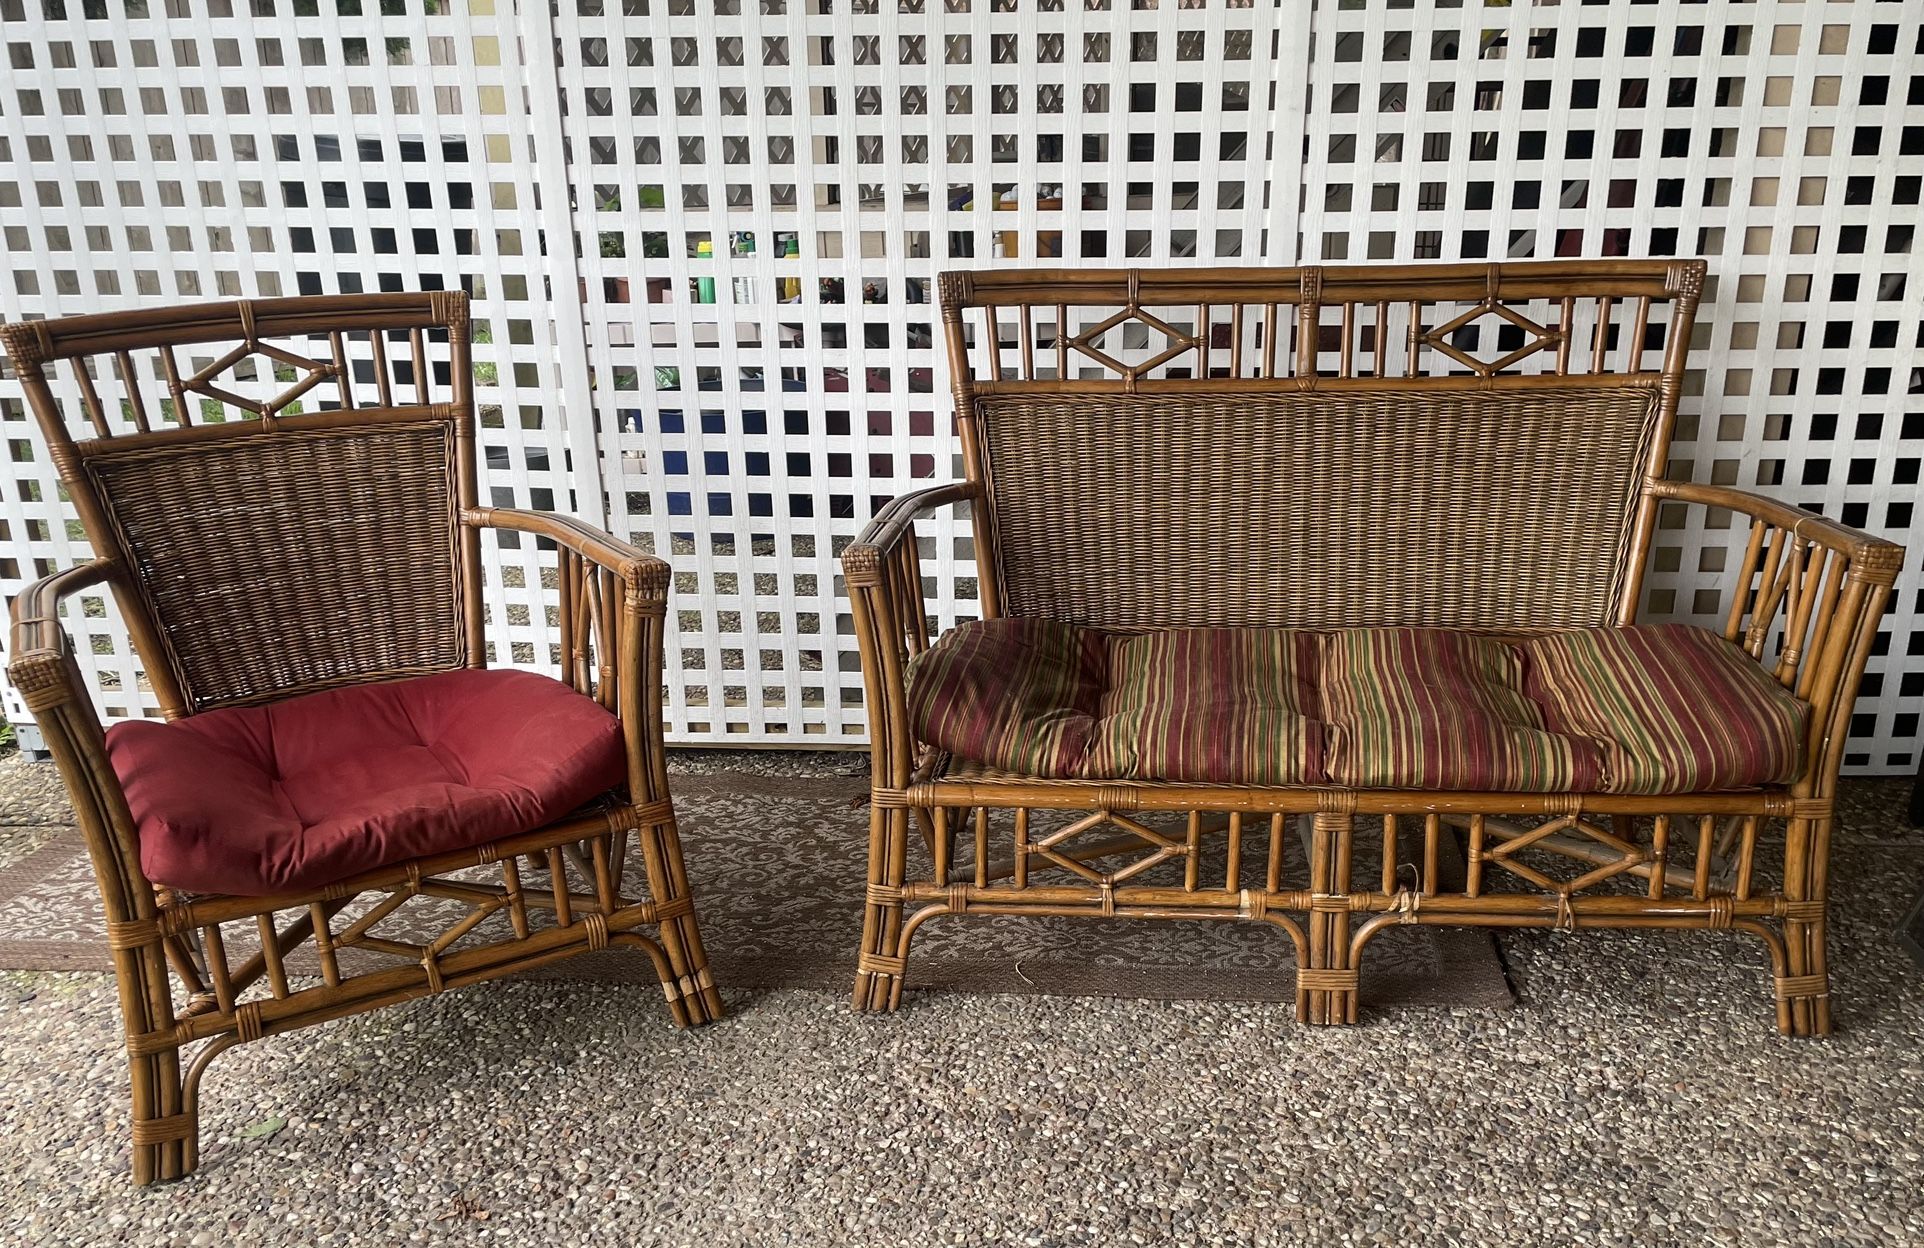 Covered Patio Furniture/Sunroom/loveseat&chair